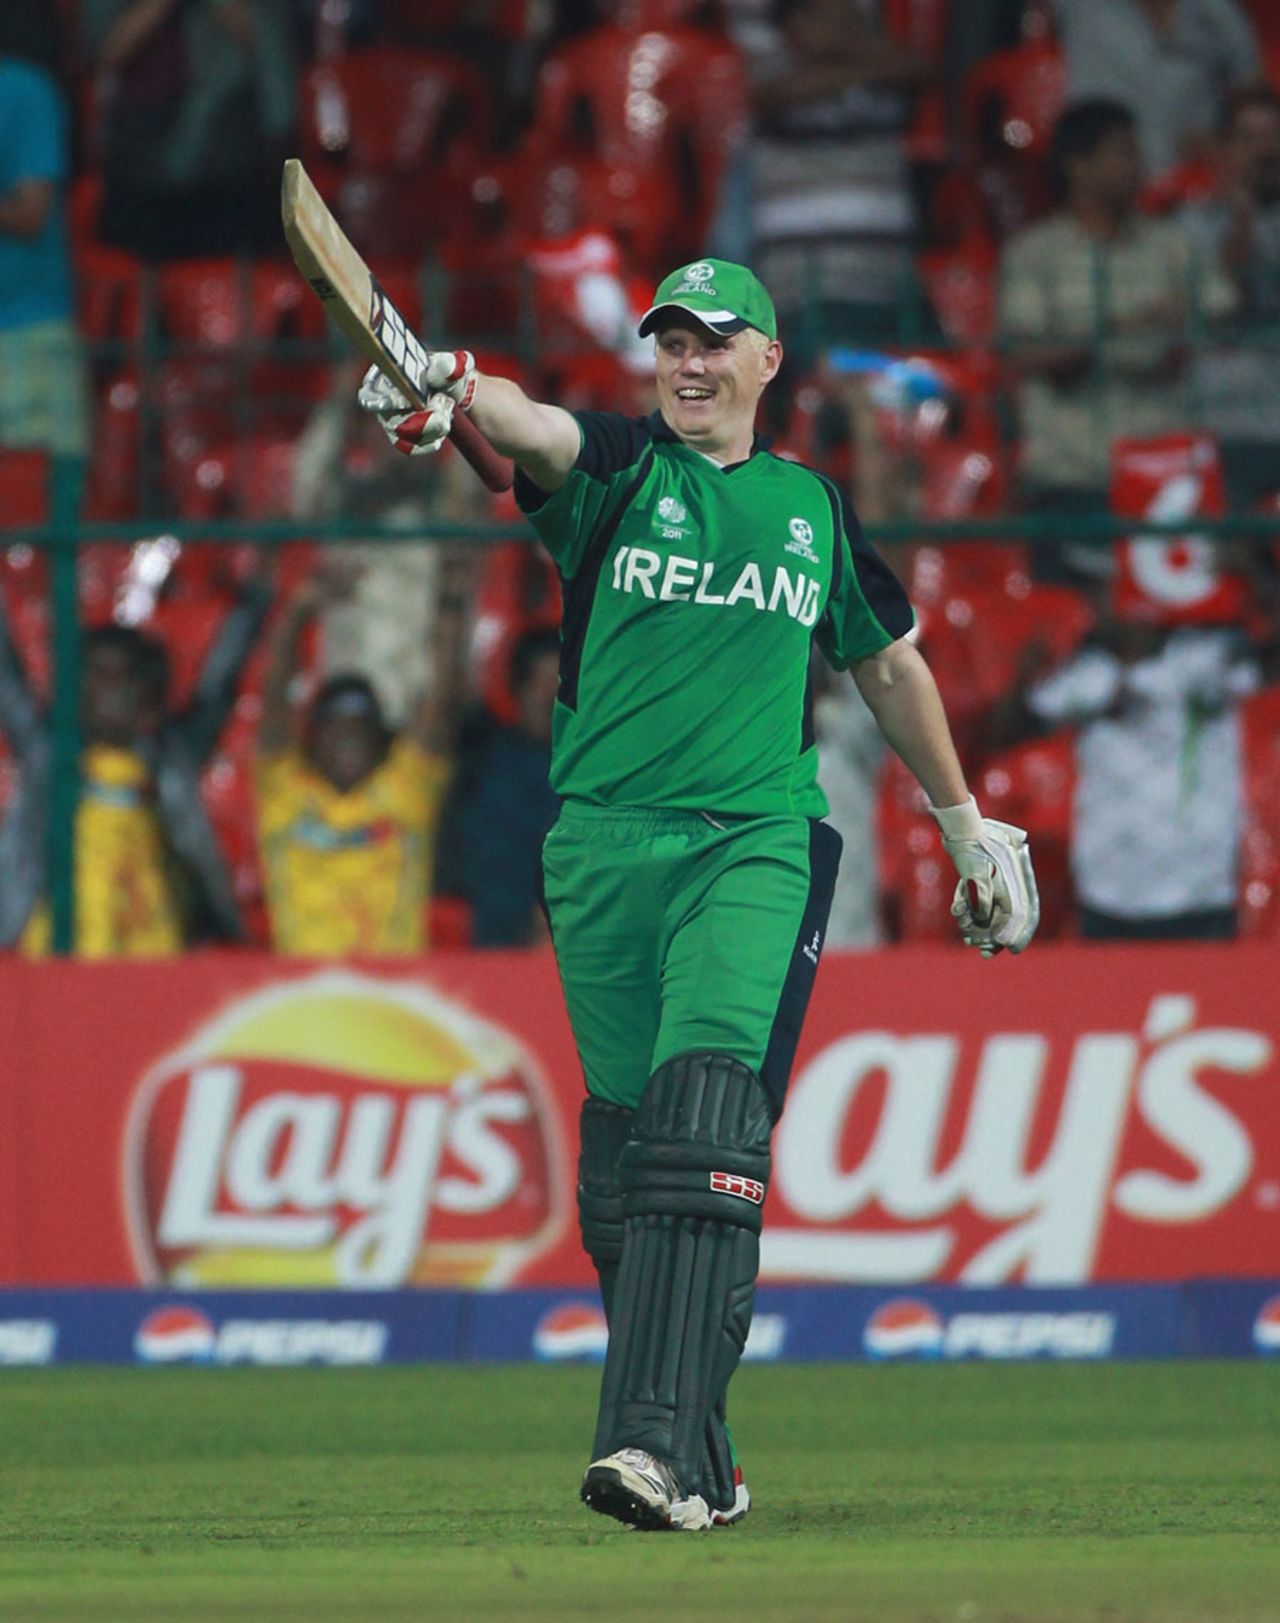 Kevin O'Brien obliterated the  record for fastest World Cup century with a 50-ball epic, England v Ireland, World Cup 2011, Bangalore, March 2, 2011